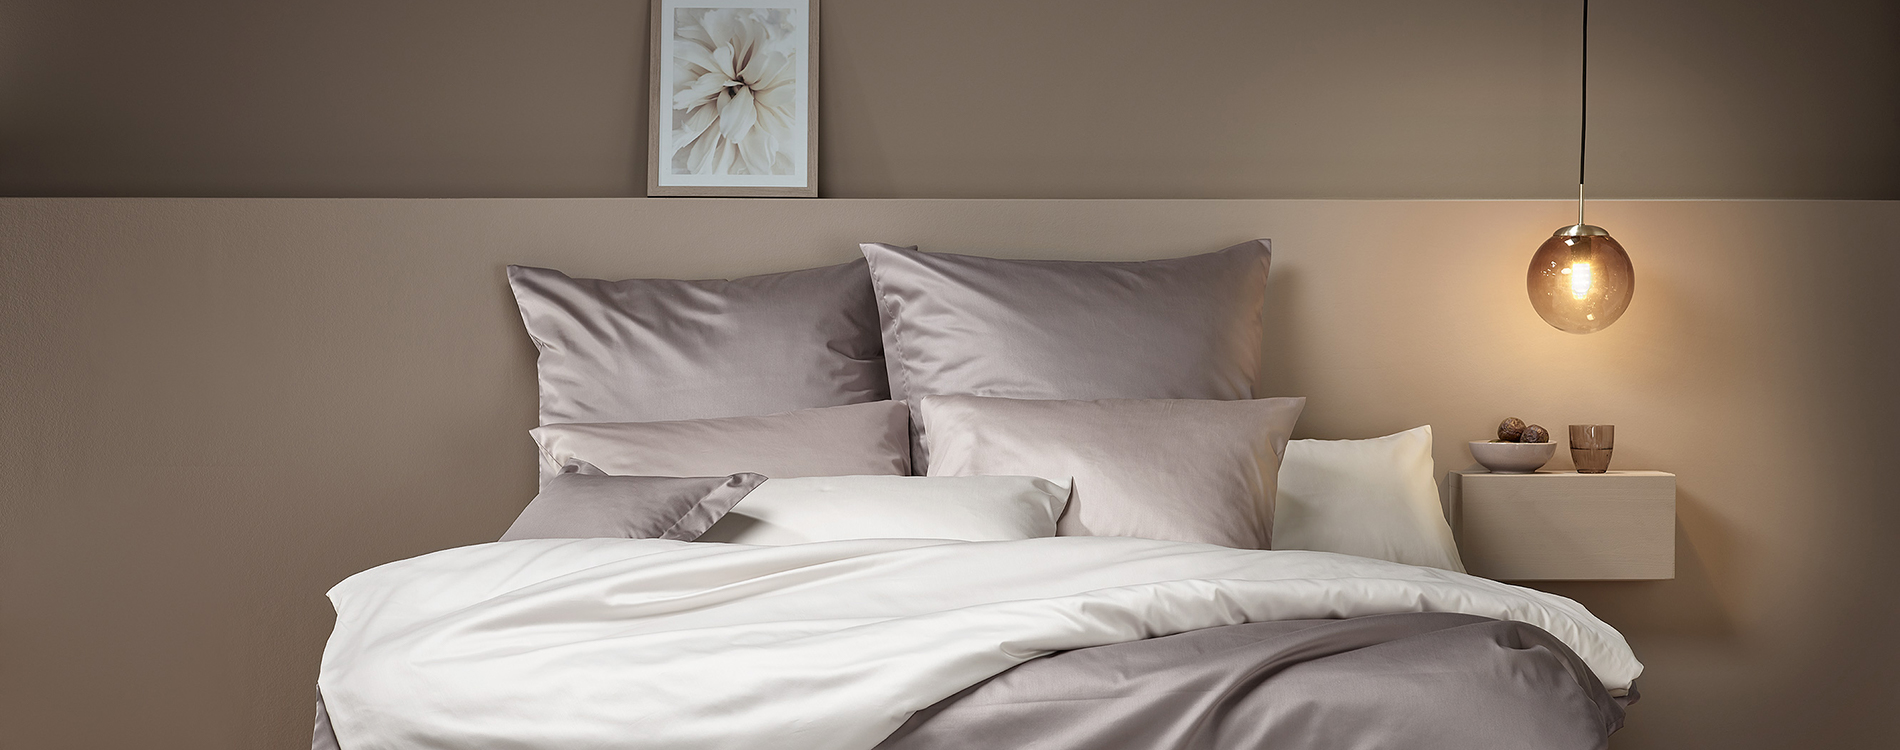 One color bed linen